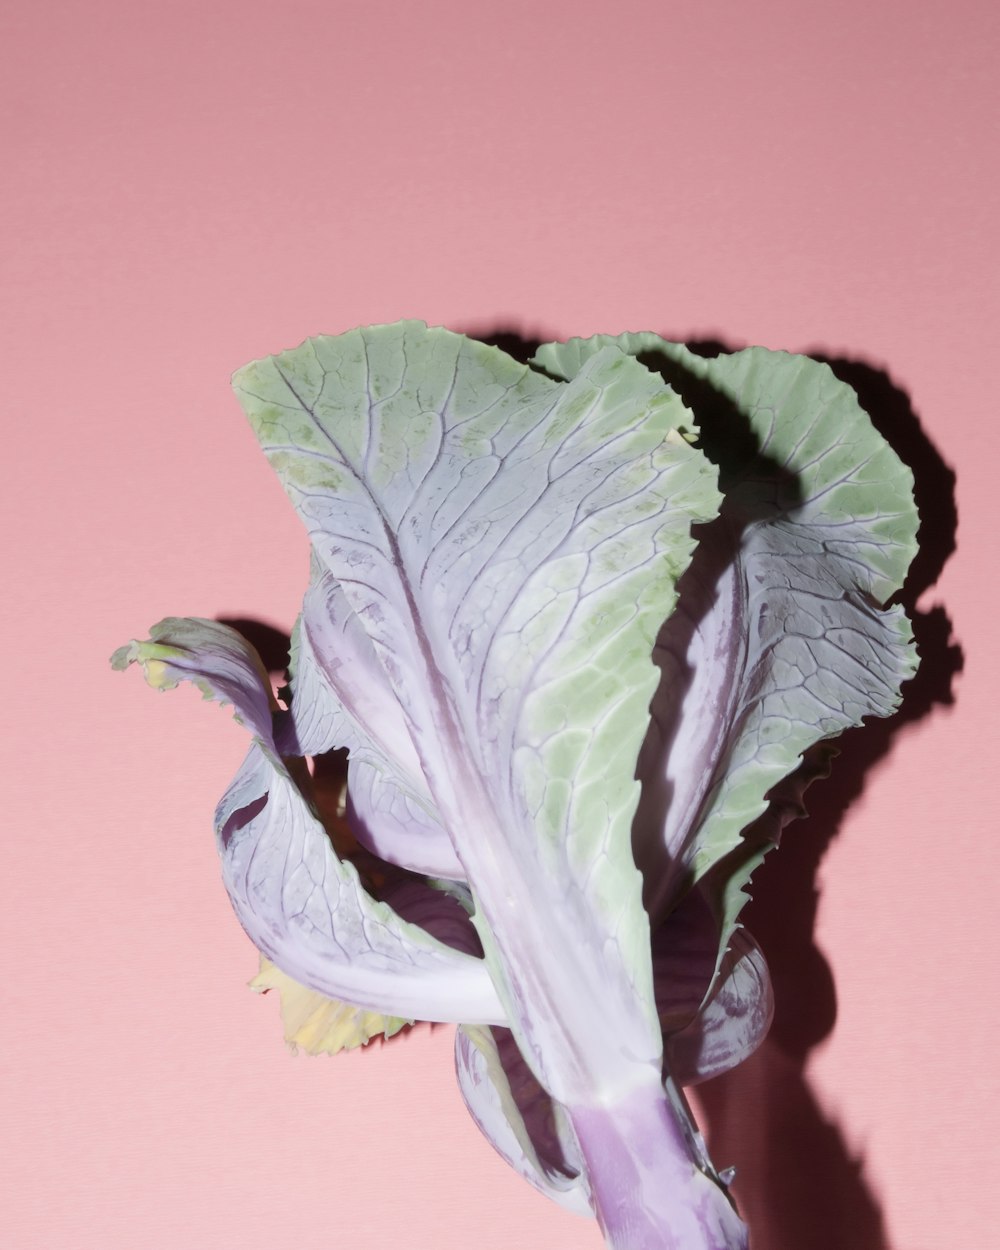 green leafy vegetable on pink surface